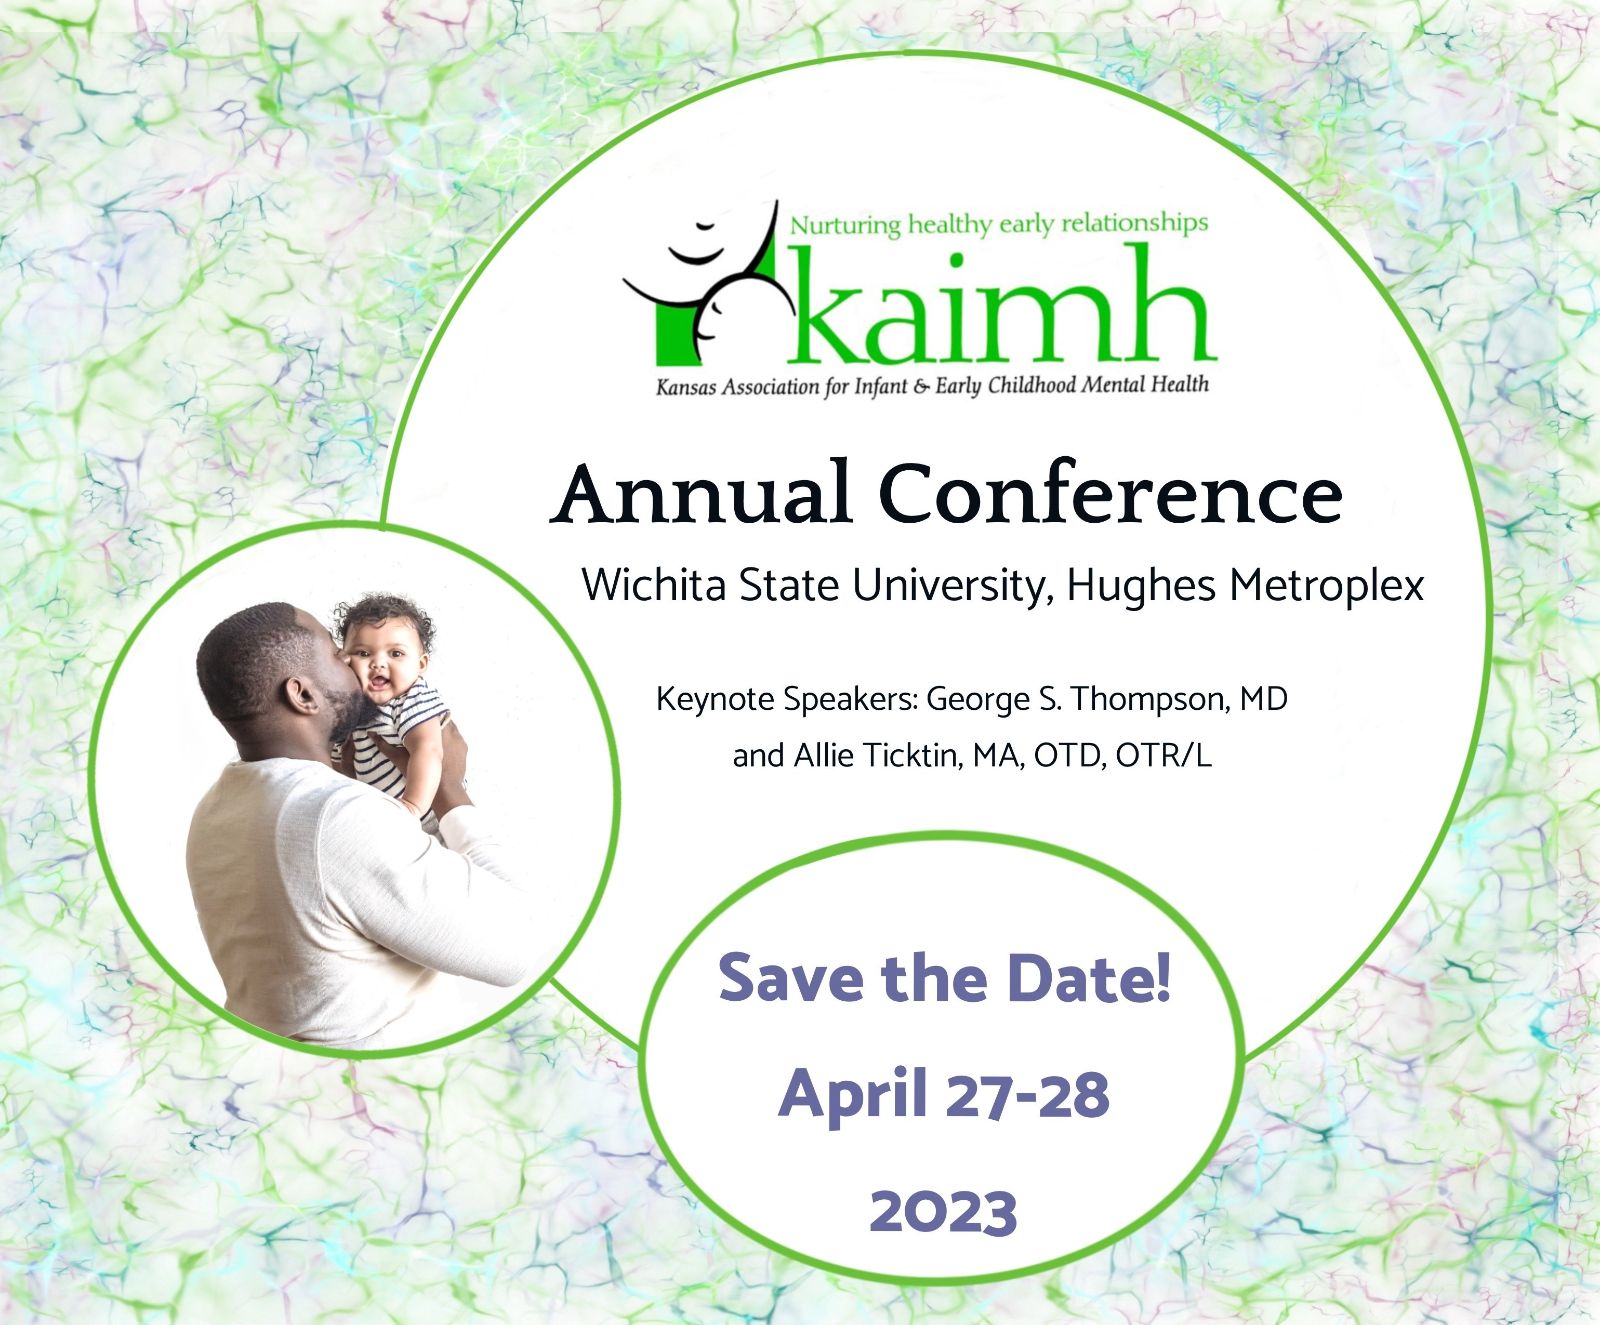 Save%20the%20Date%20conference%202023%20large.jpg